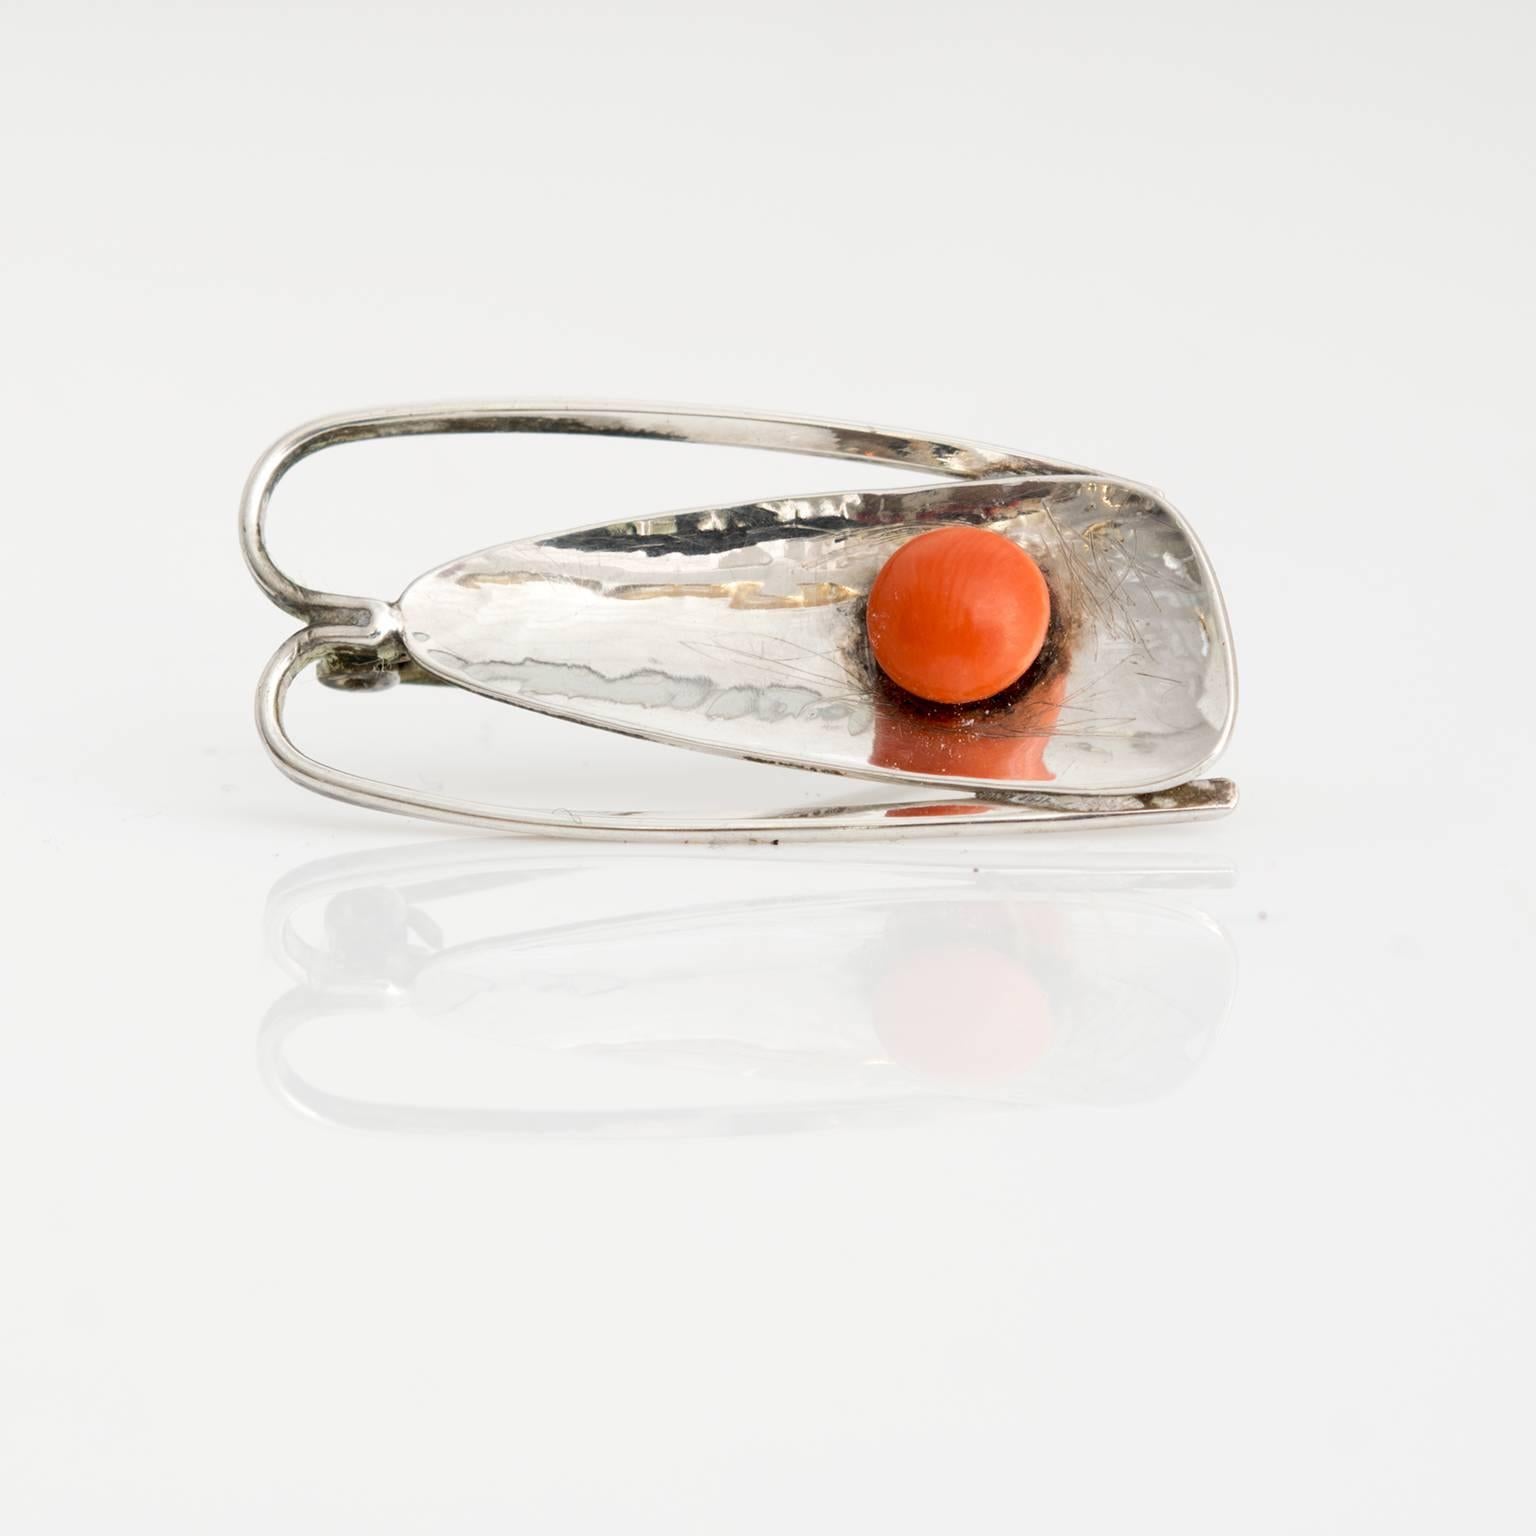 Silver Bauhaus brooch with coral detail, by Hein Meyer, Bremen, Germany, circa 1930s.
Measures: Length: 1.75